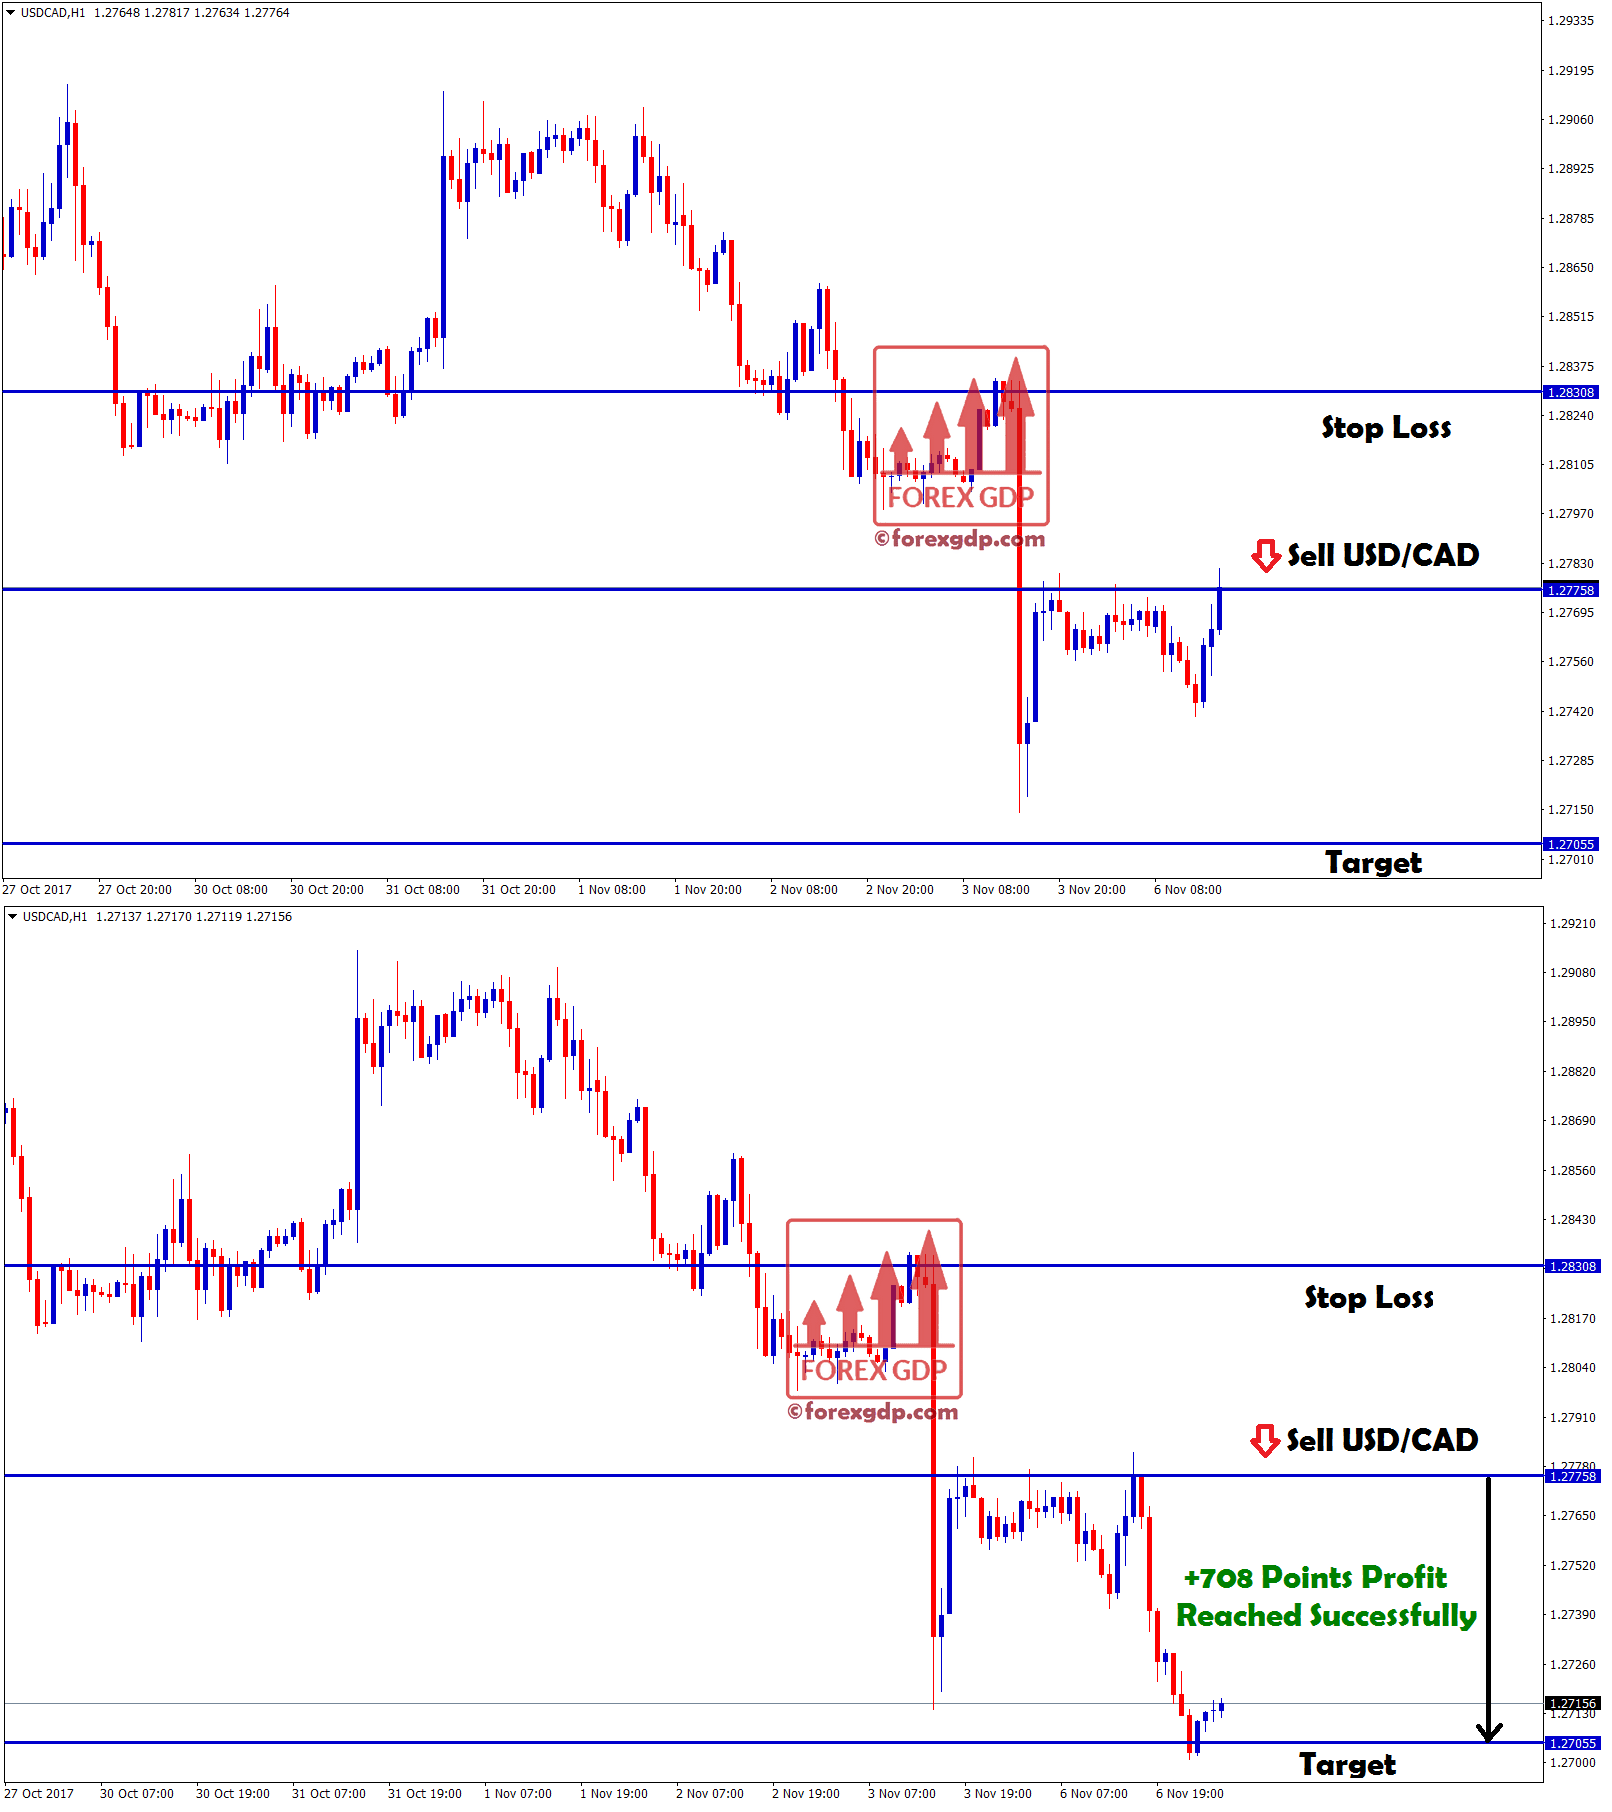 USDCAD sell signal reached 708 points